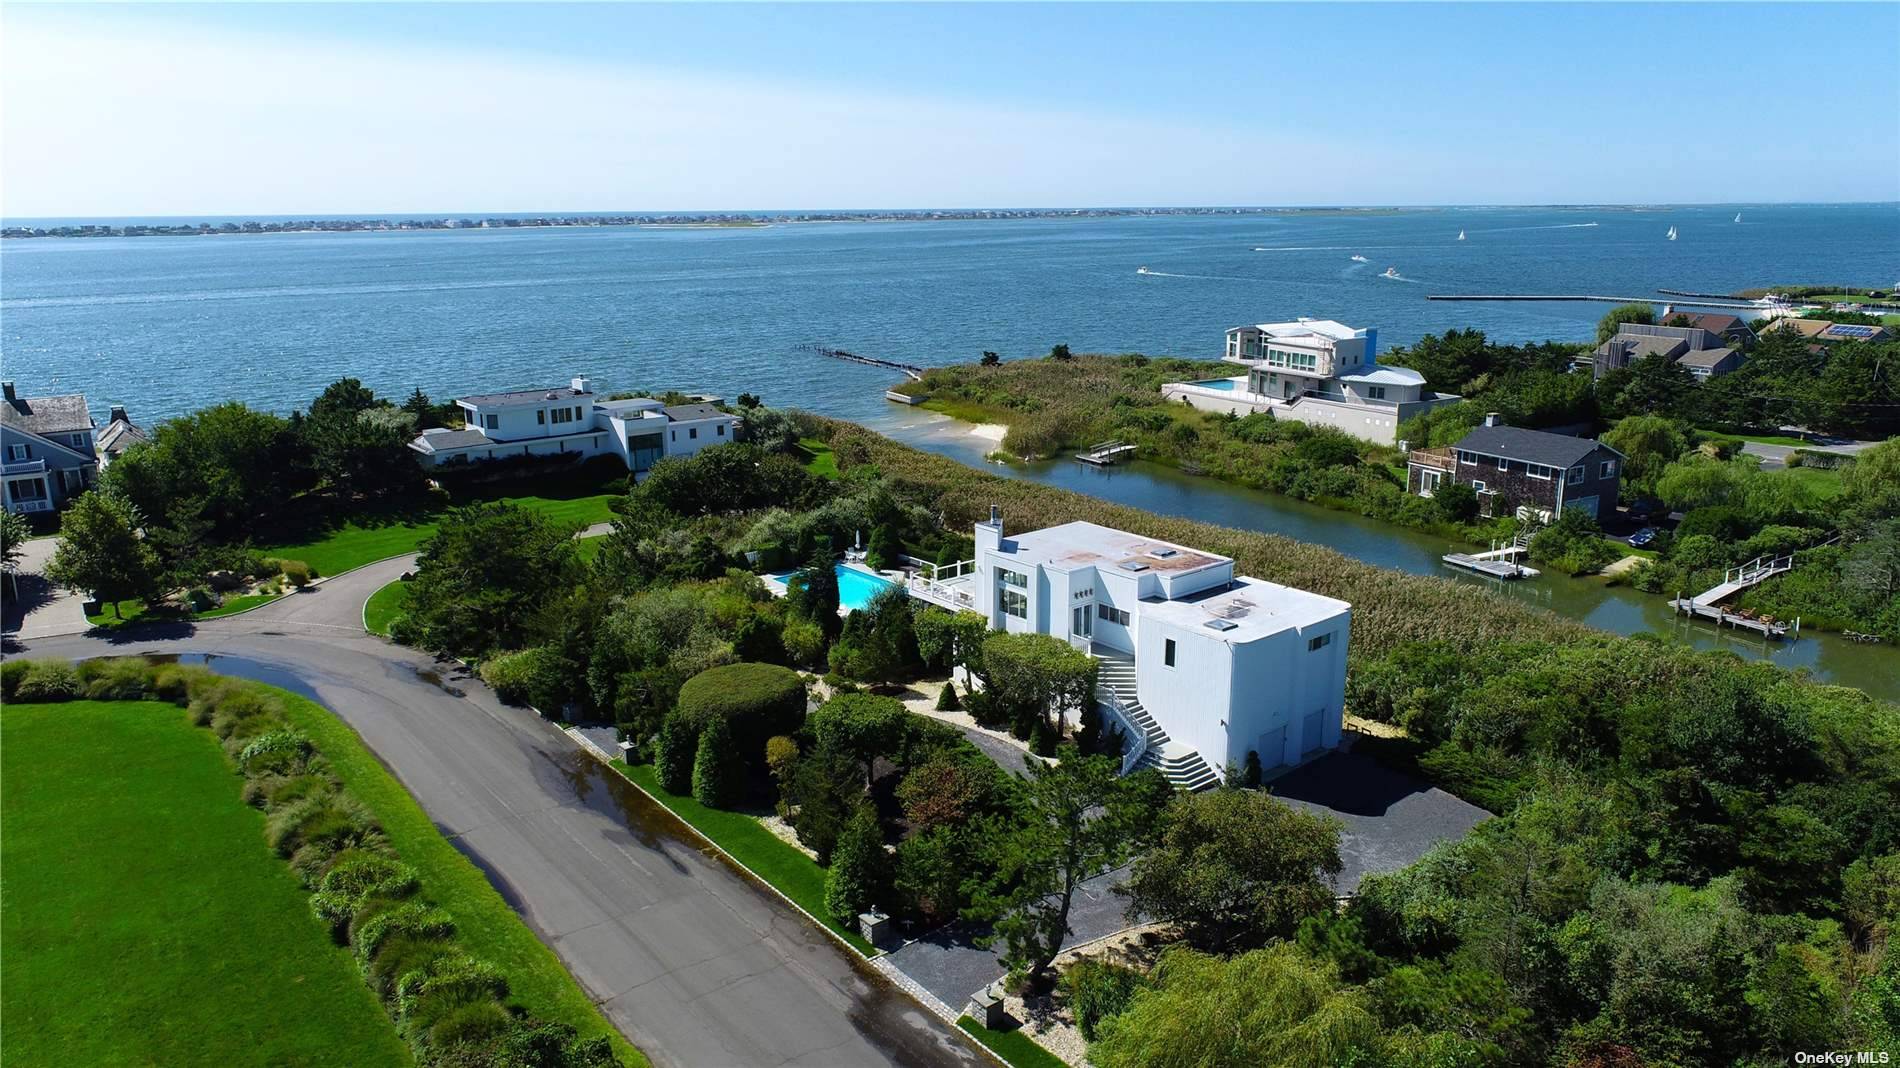 Chic and modern, this upside down open concept waterfront property takes advantage of the panoramic vistas over Moriches Bay.